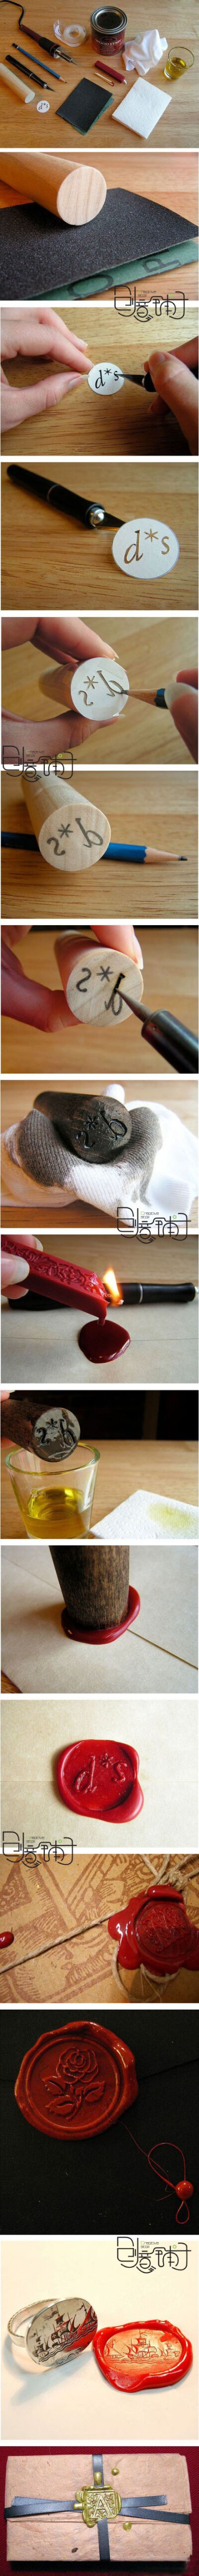 Make your own wax stamp...